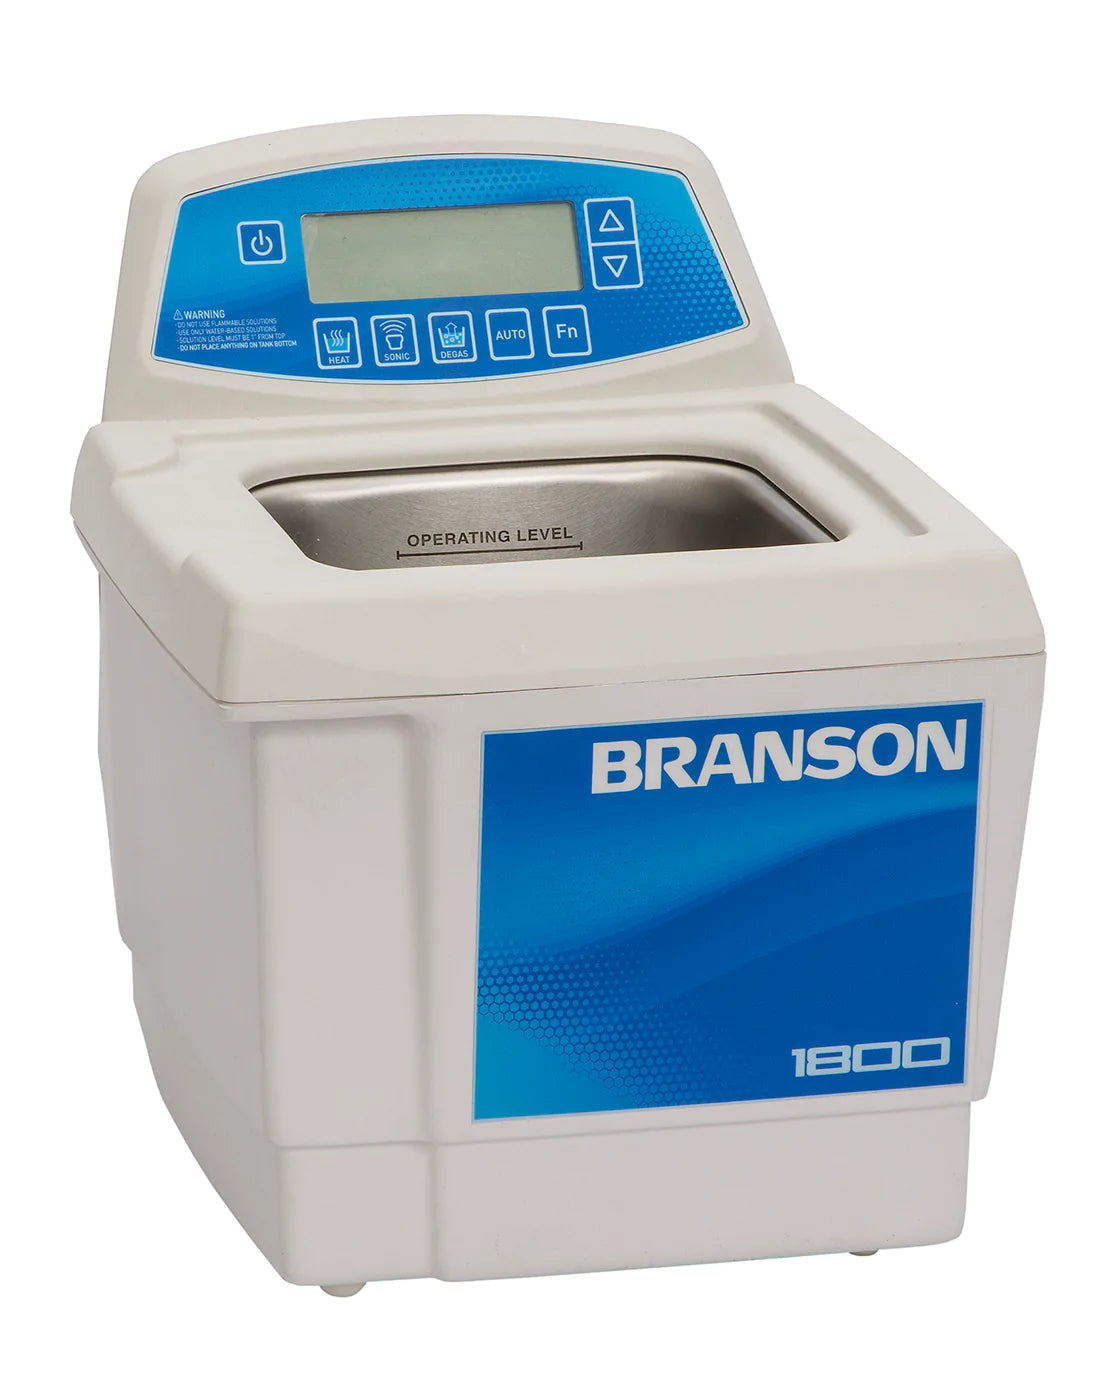 stainless-steel-perforated-tray-for-branson-8500-8800-ultrasonic-cleaners-100-410-168